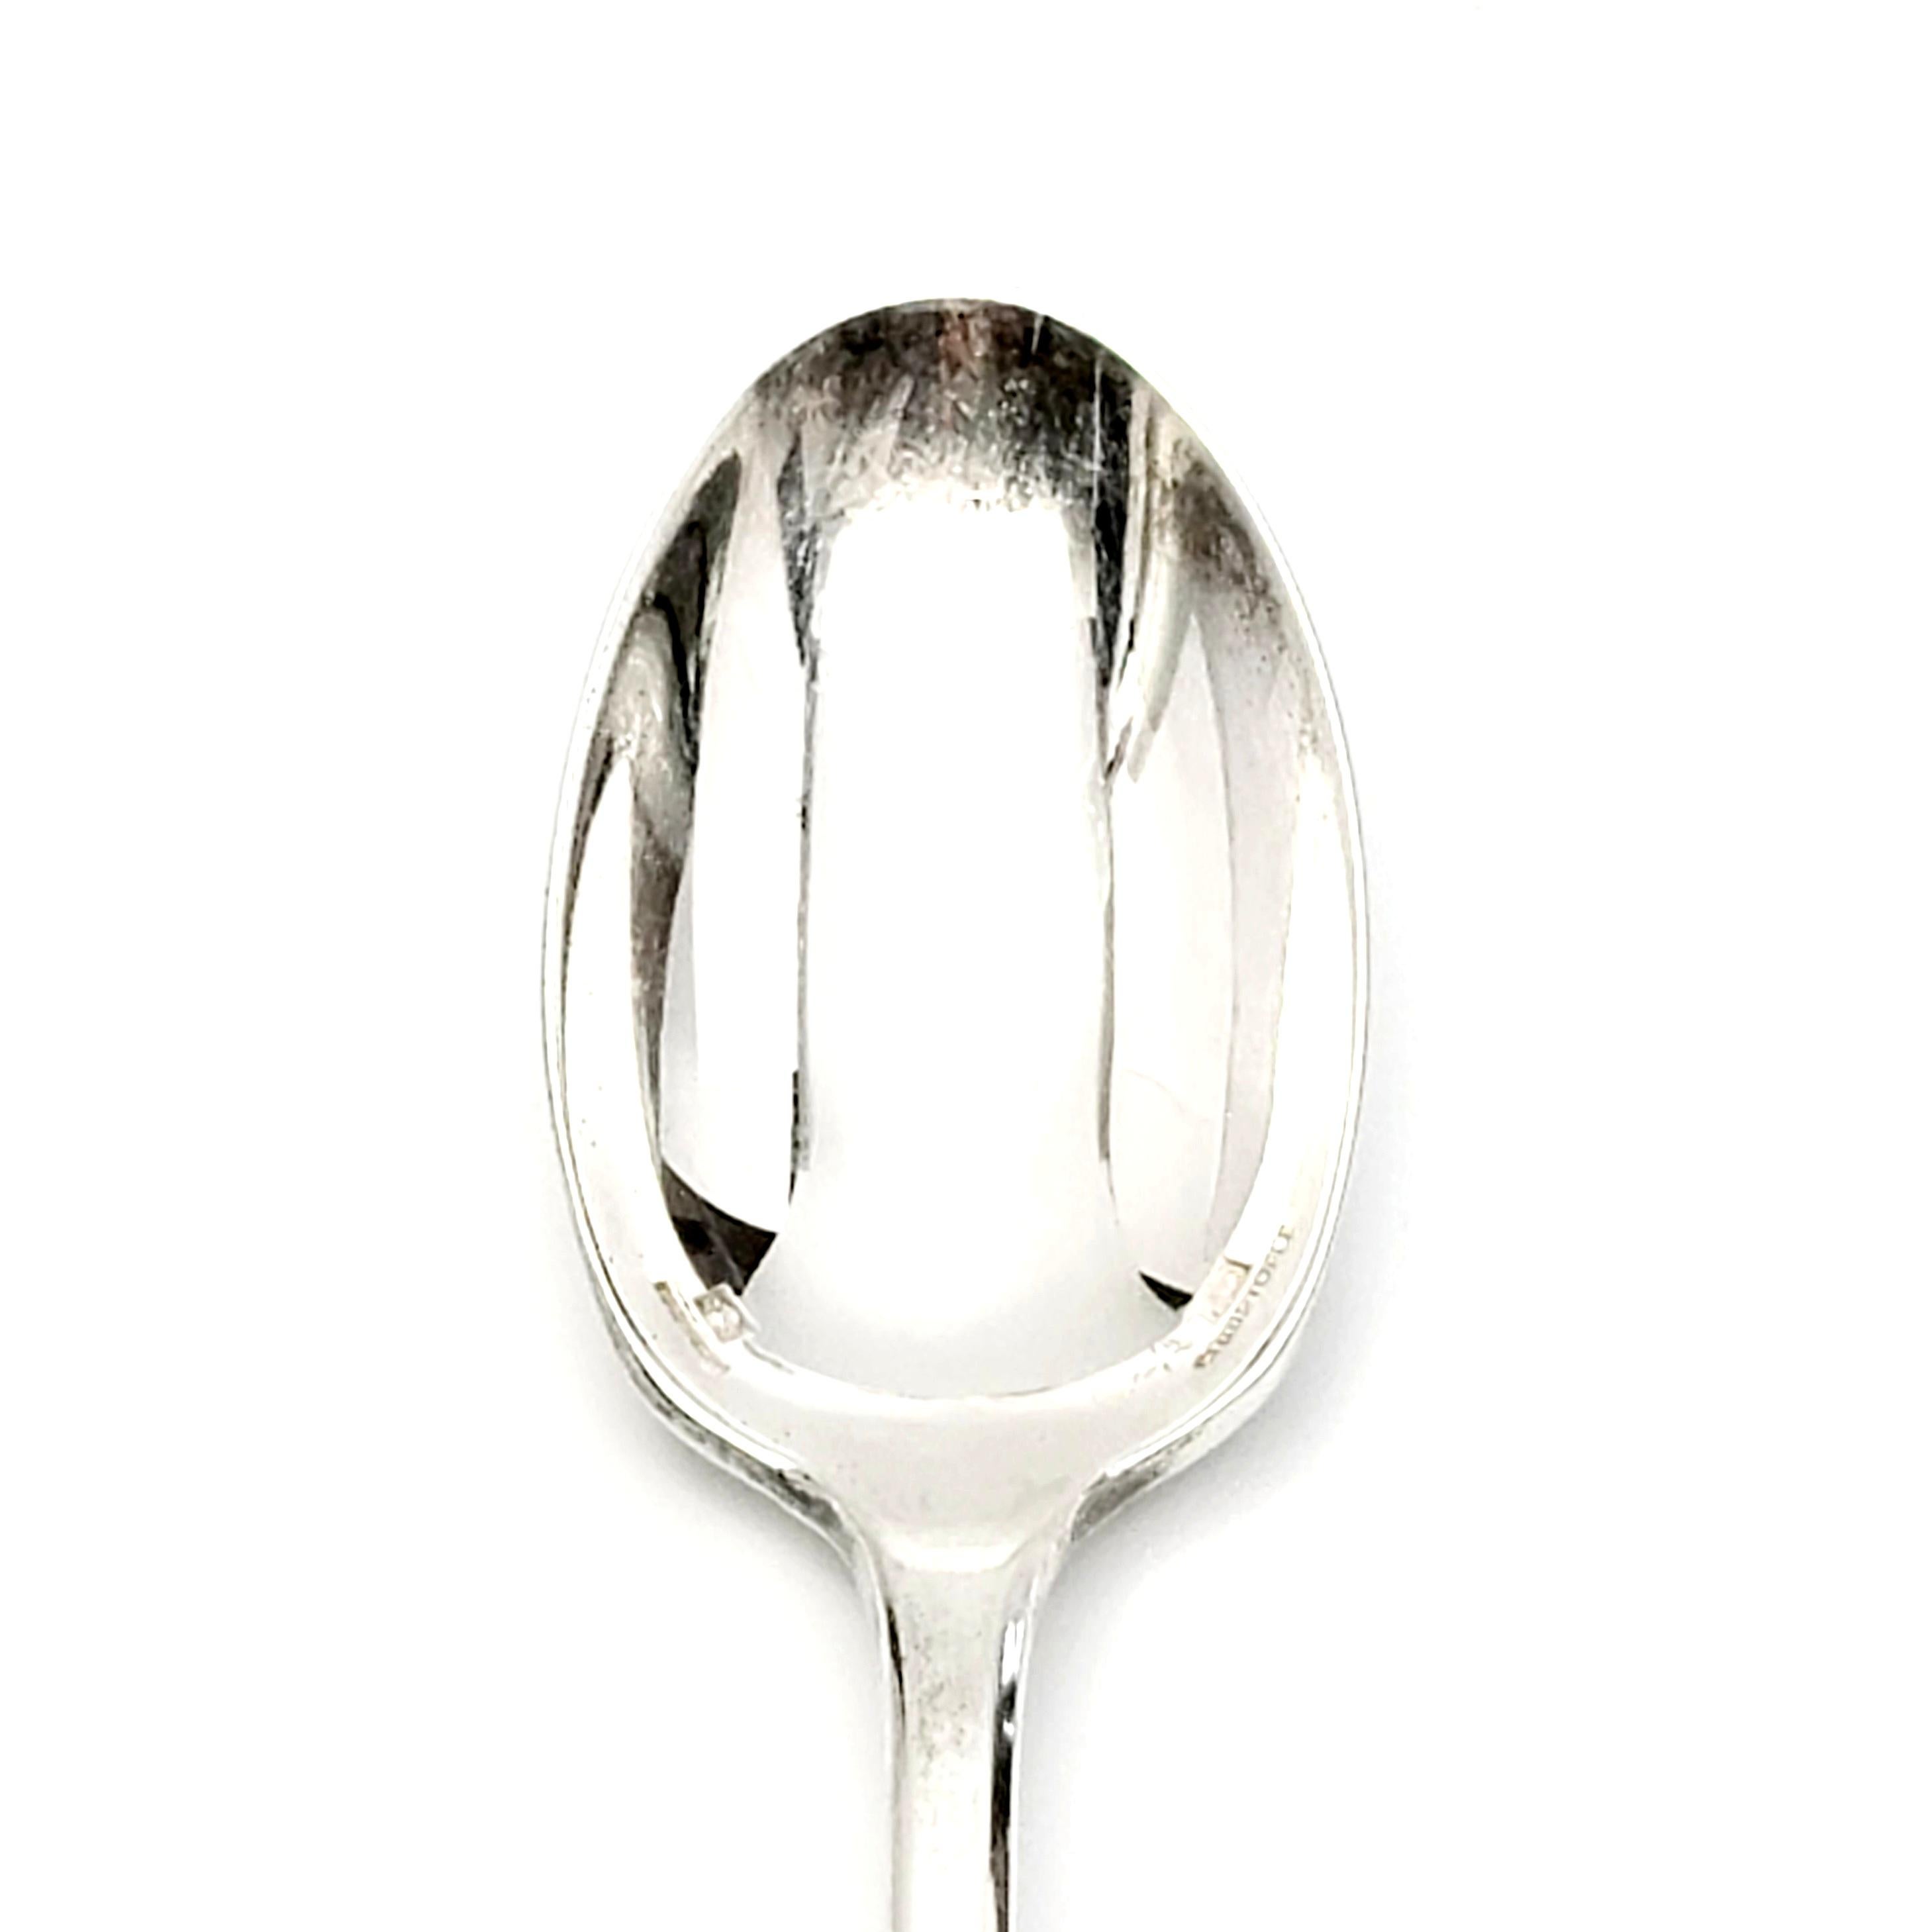 Christofle Silverplate ARIA Oval European Soup Spoons s 